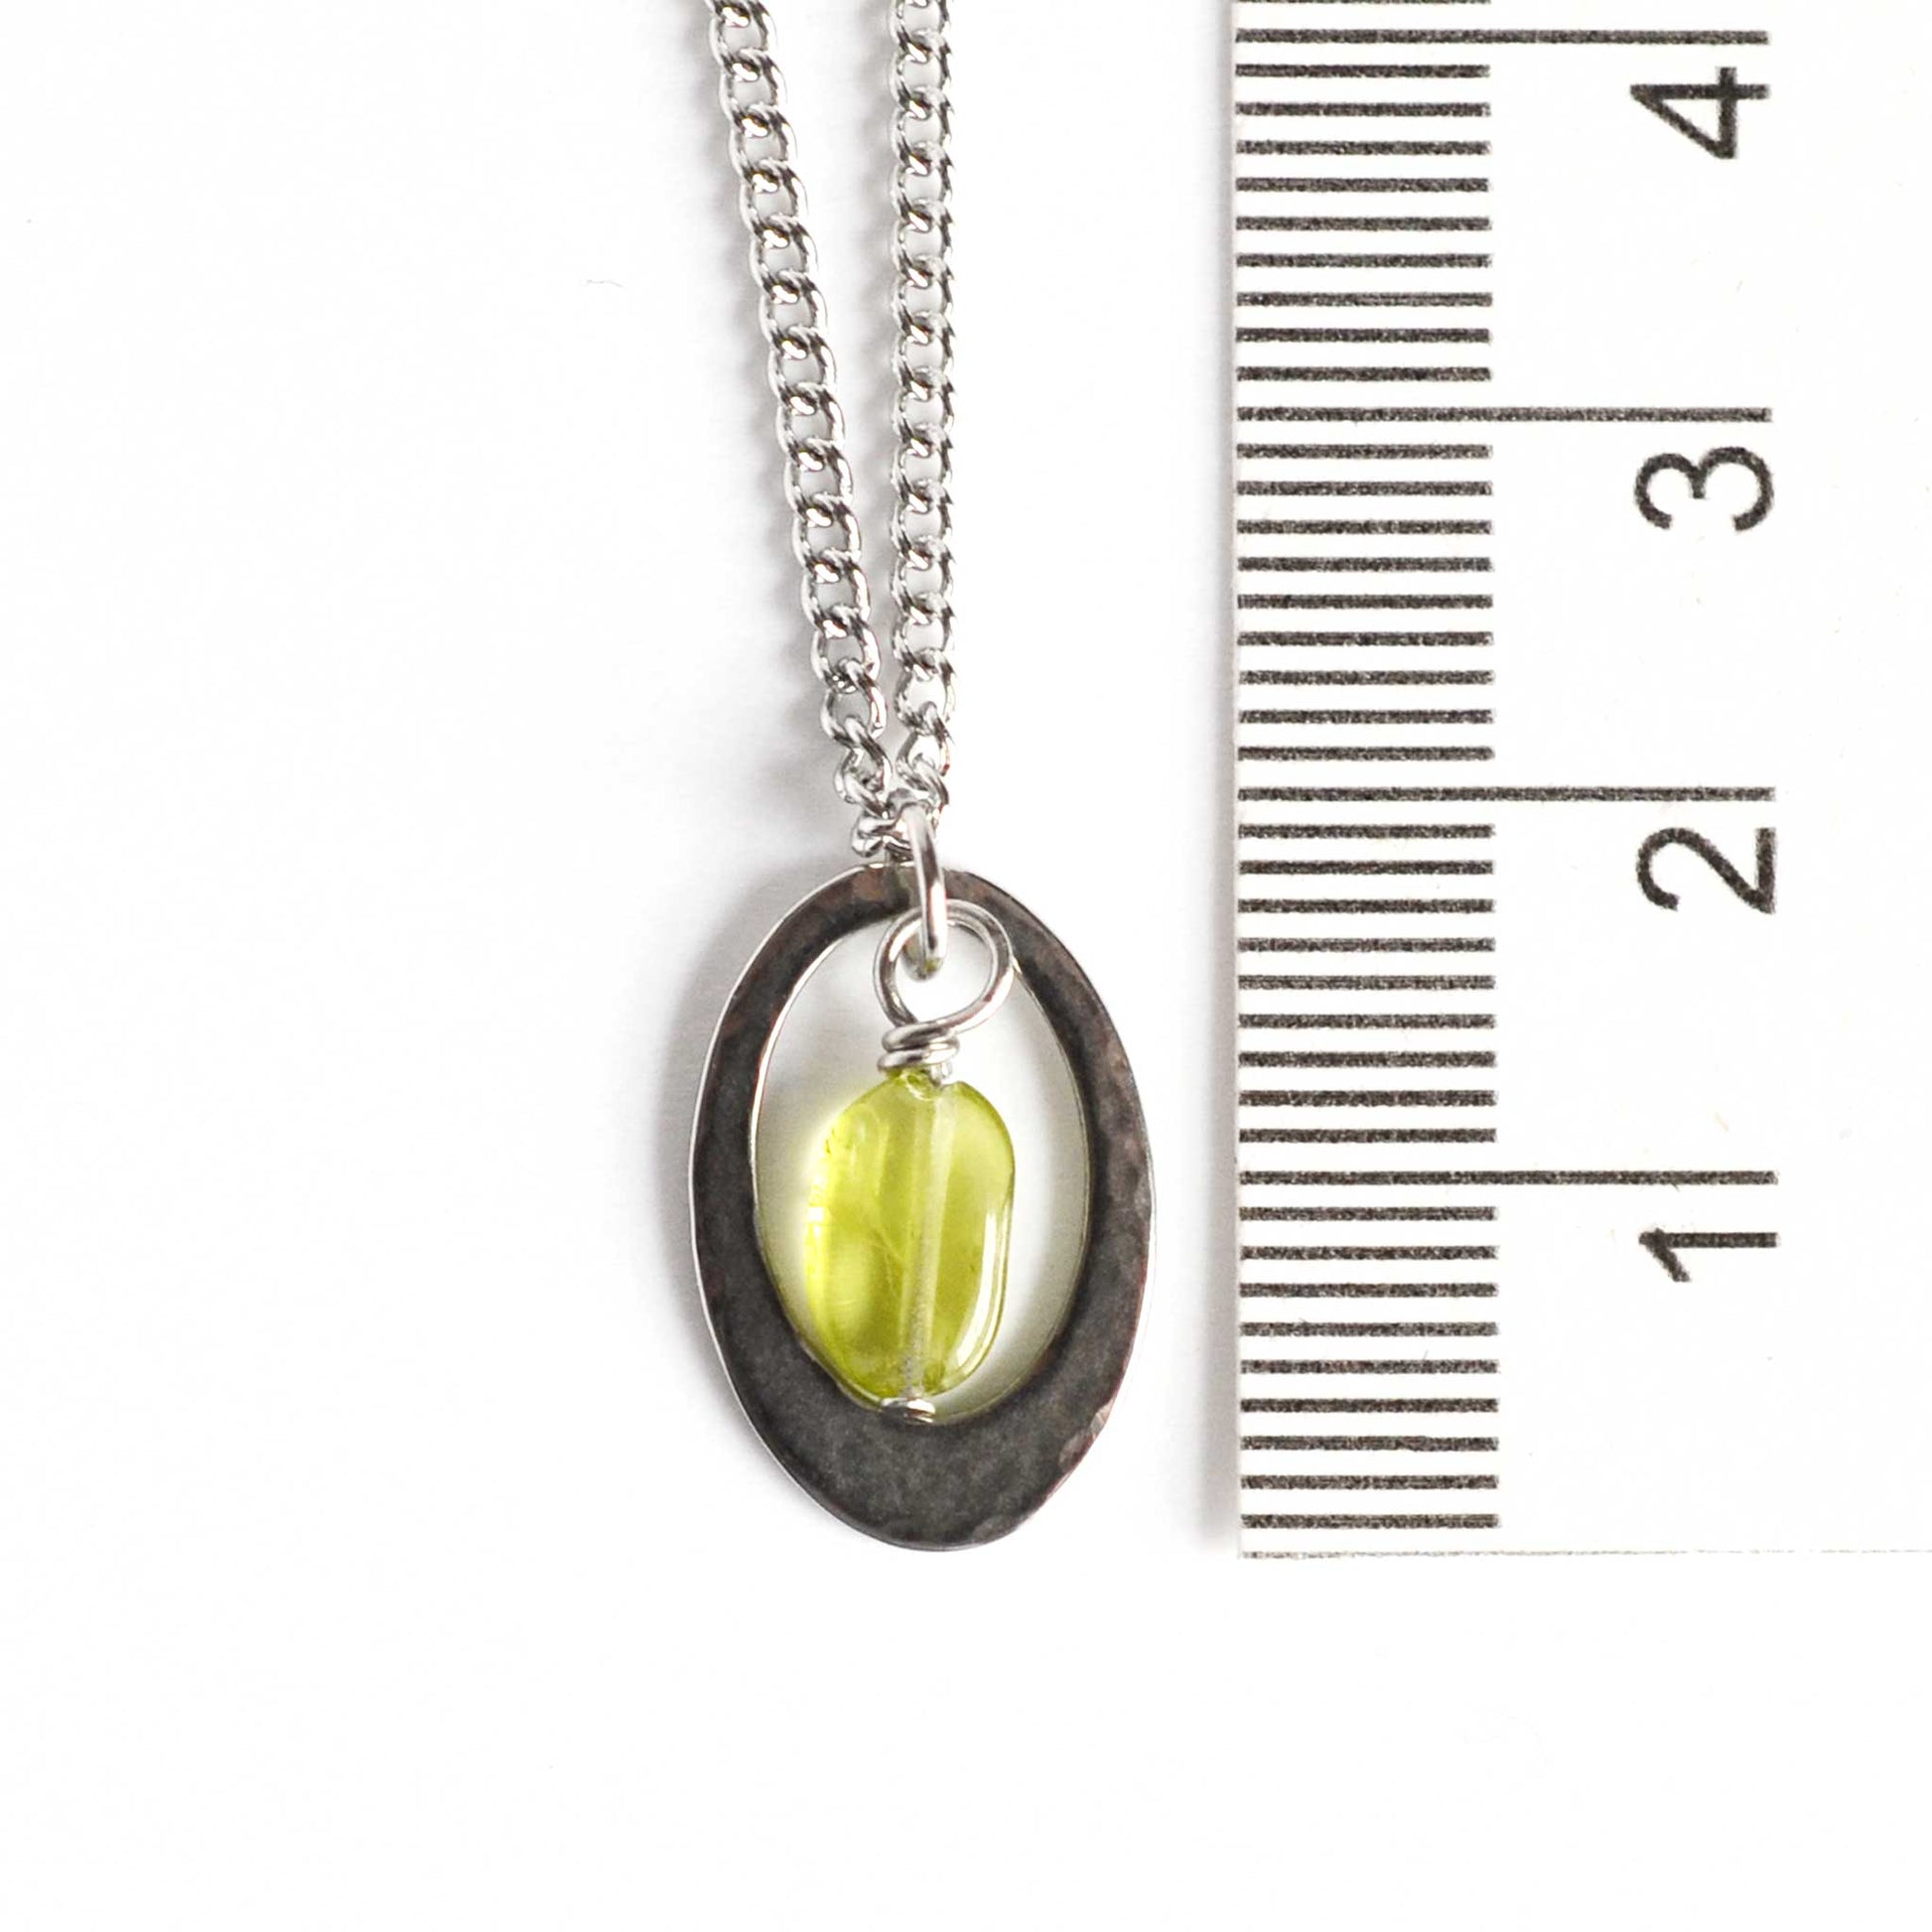 Dainty oval Peridot pendant necklace next to ruler.